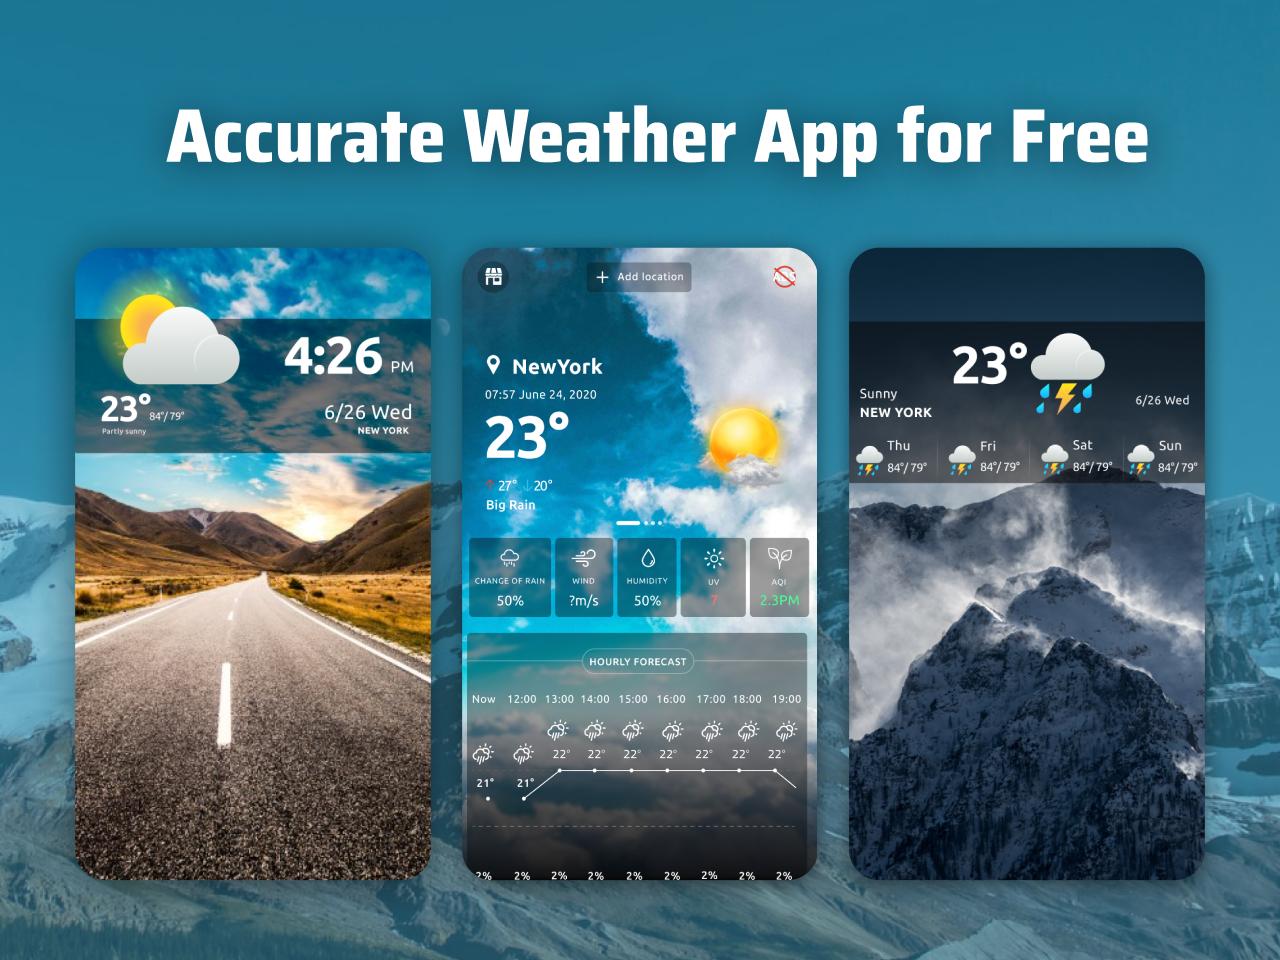 Weather App - Weather Underground App for Android 1.1.9 Screenshot 1